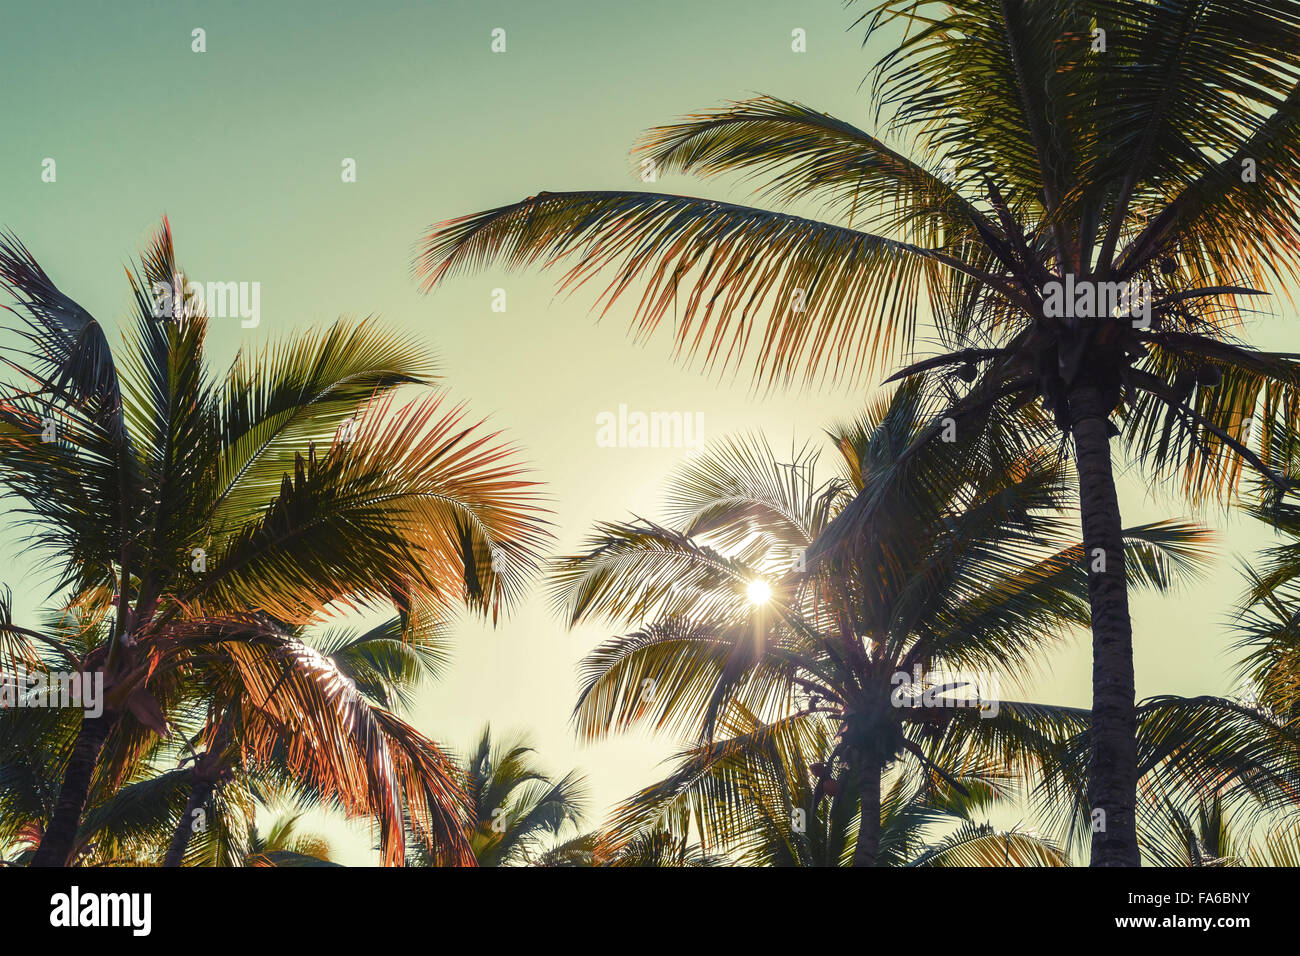 Coconut palm trees and shining sun. Vintage stylized photo with tonal correction filter effect Stock Photo